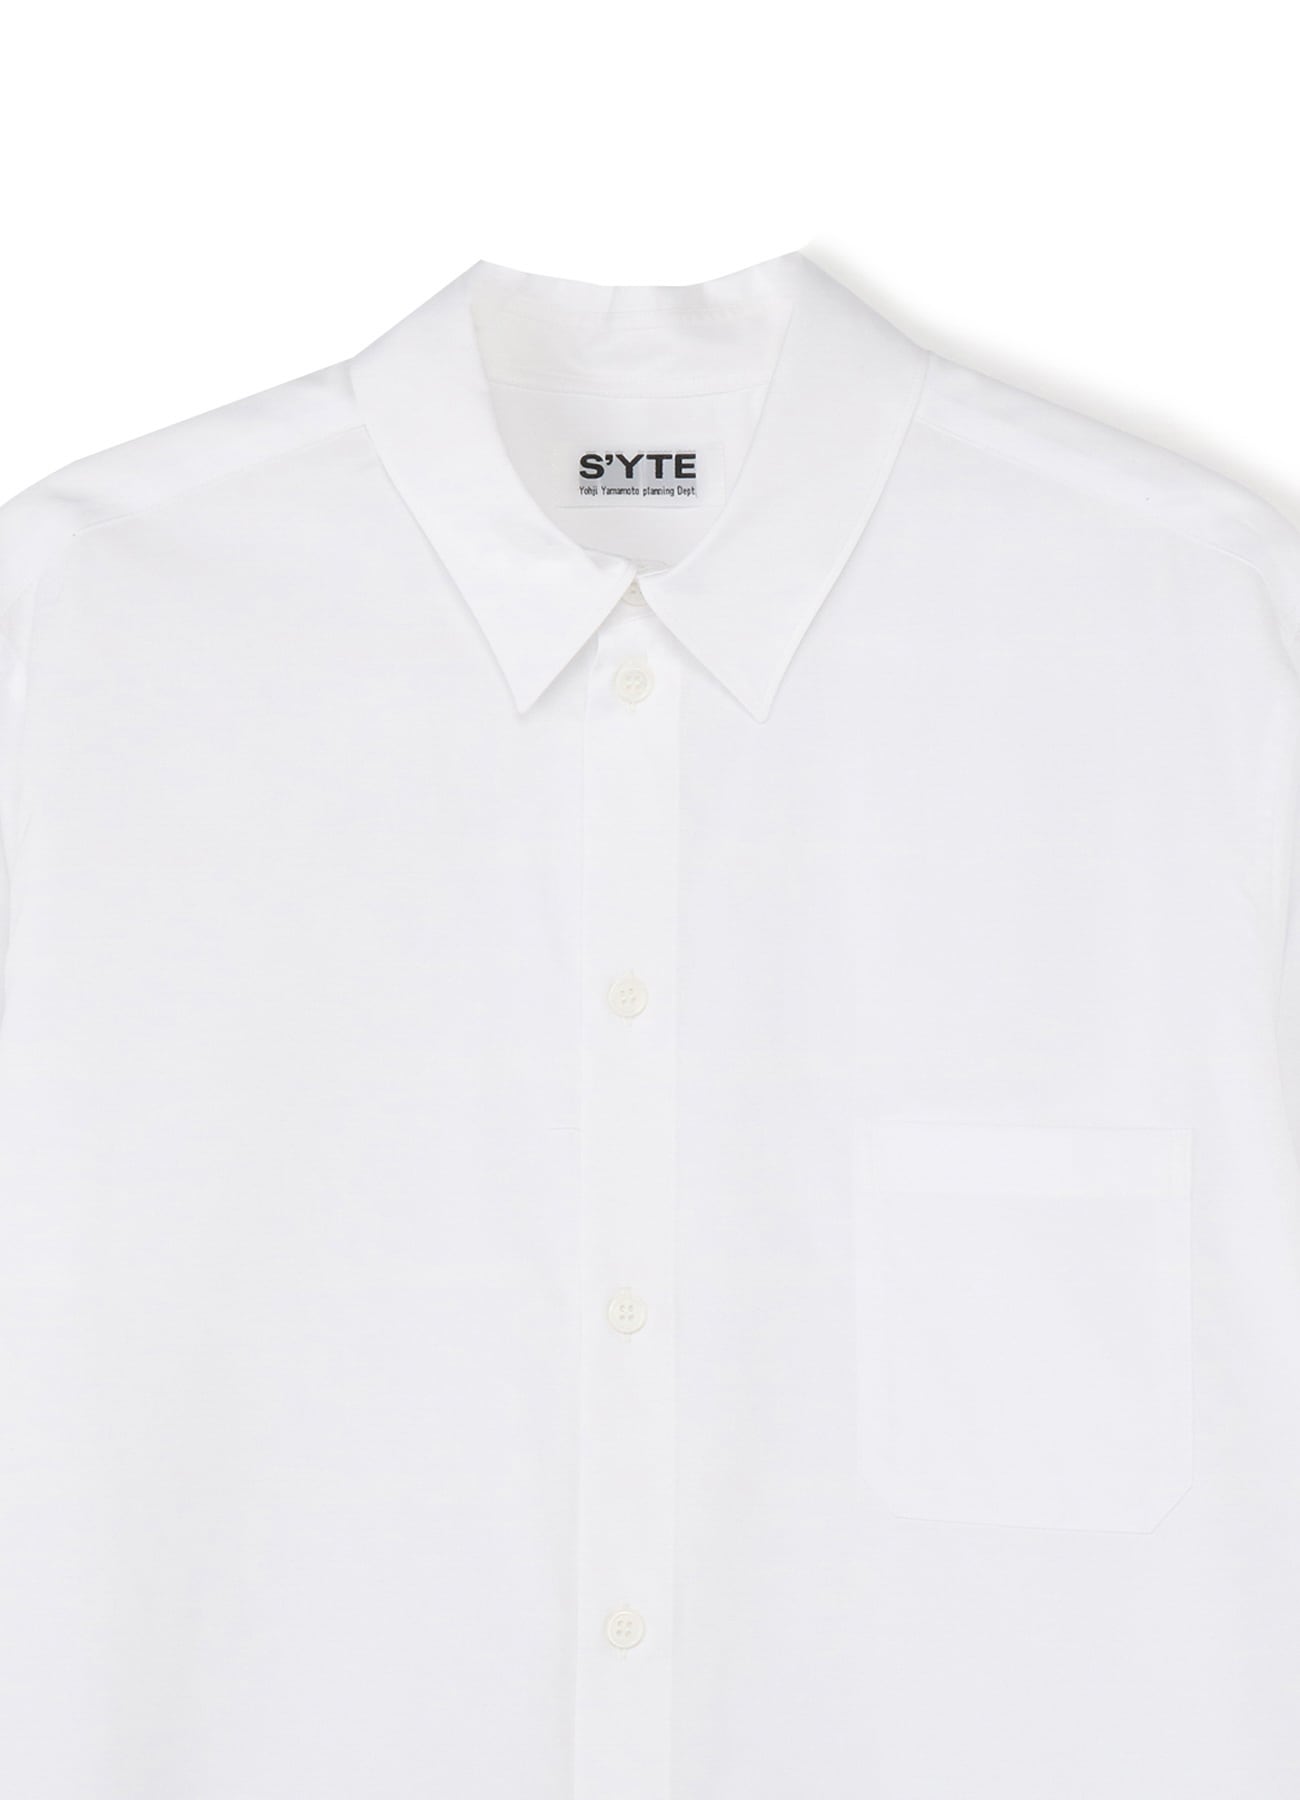 100/2 BROAD REGULAR COLLAR LOOSE FIT SHIRT(M White): S'YTE｜THE